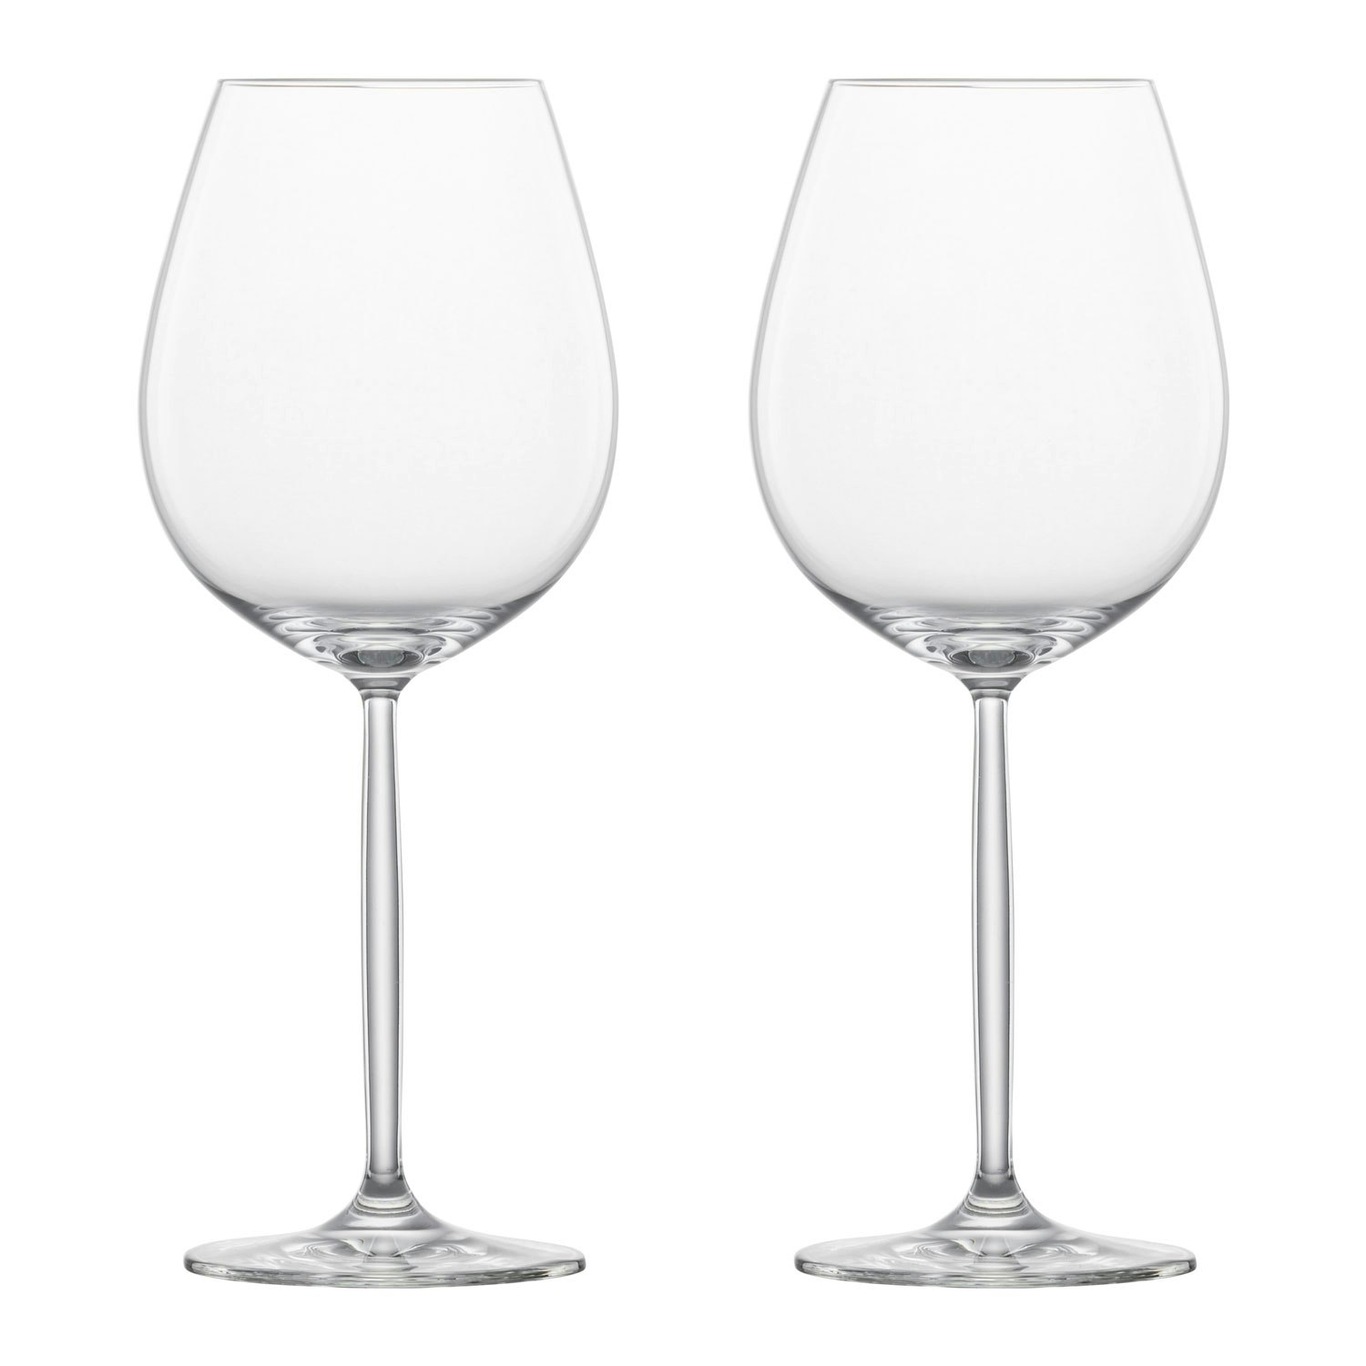 https://royaldesign.com/image/2/zwiesel-diva-water-glass-red-wine-glass-2-pack-0?w=800&quality=80